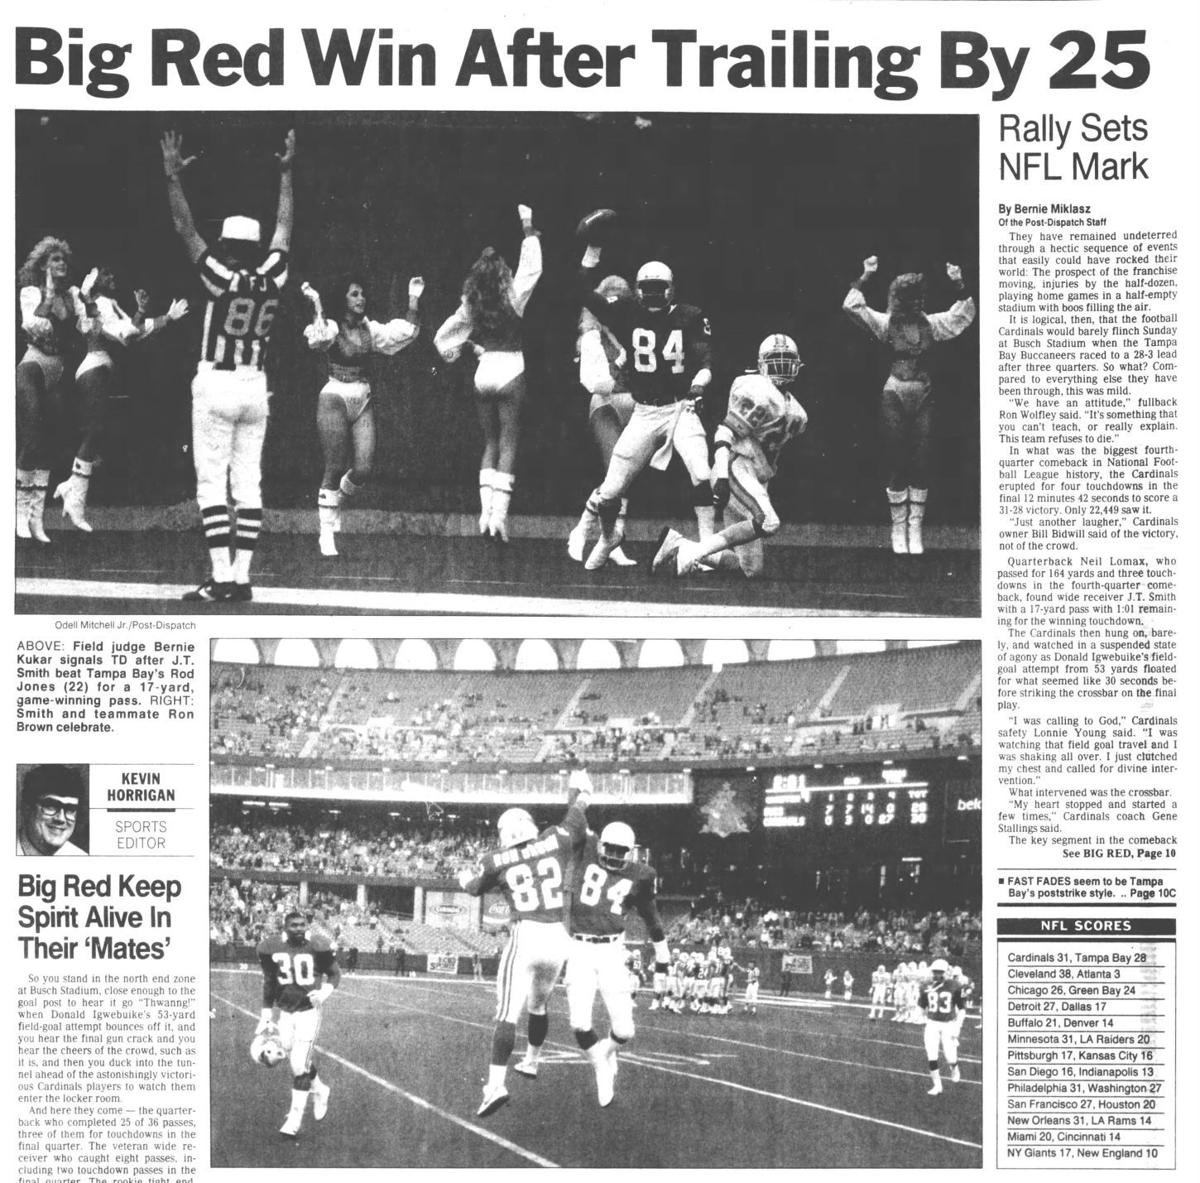 The St. Louis Football Cardinals: A Celebration of the Big Red